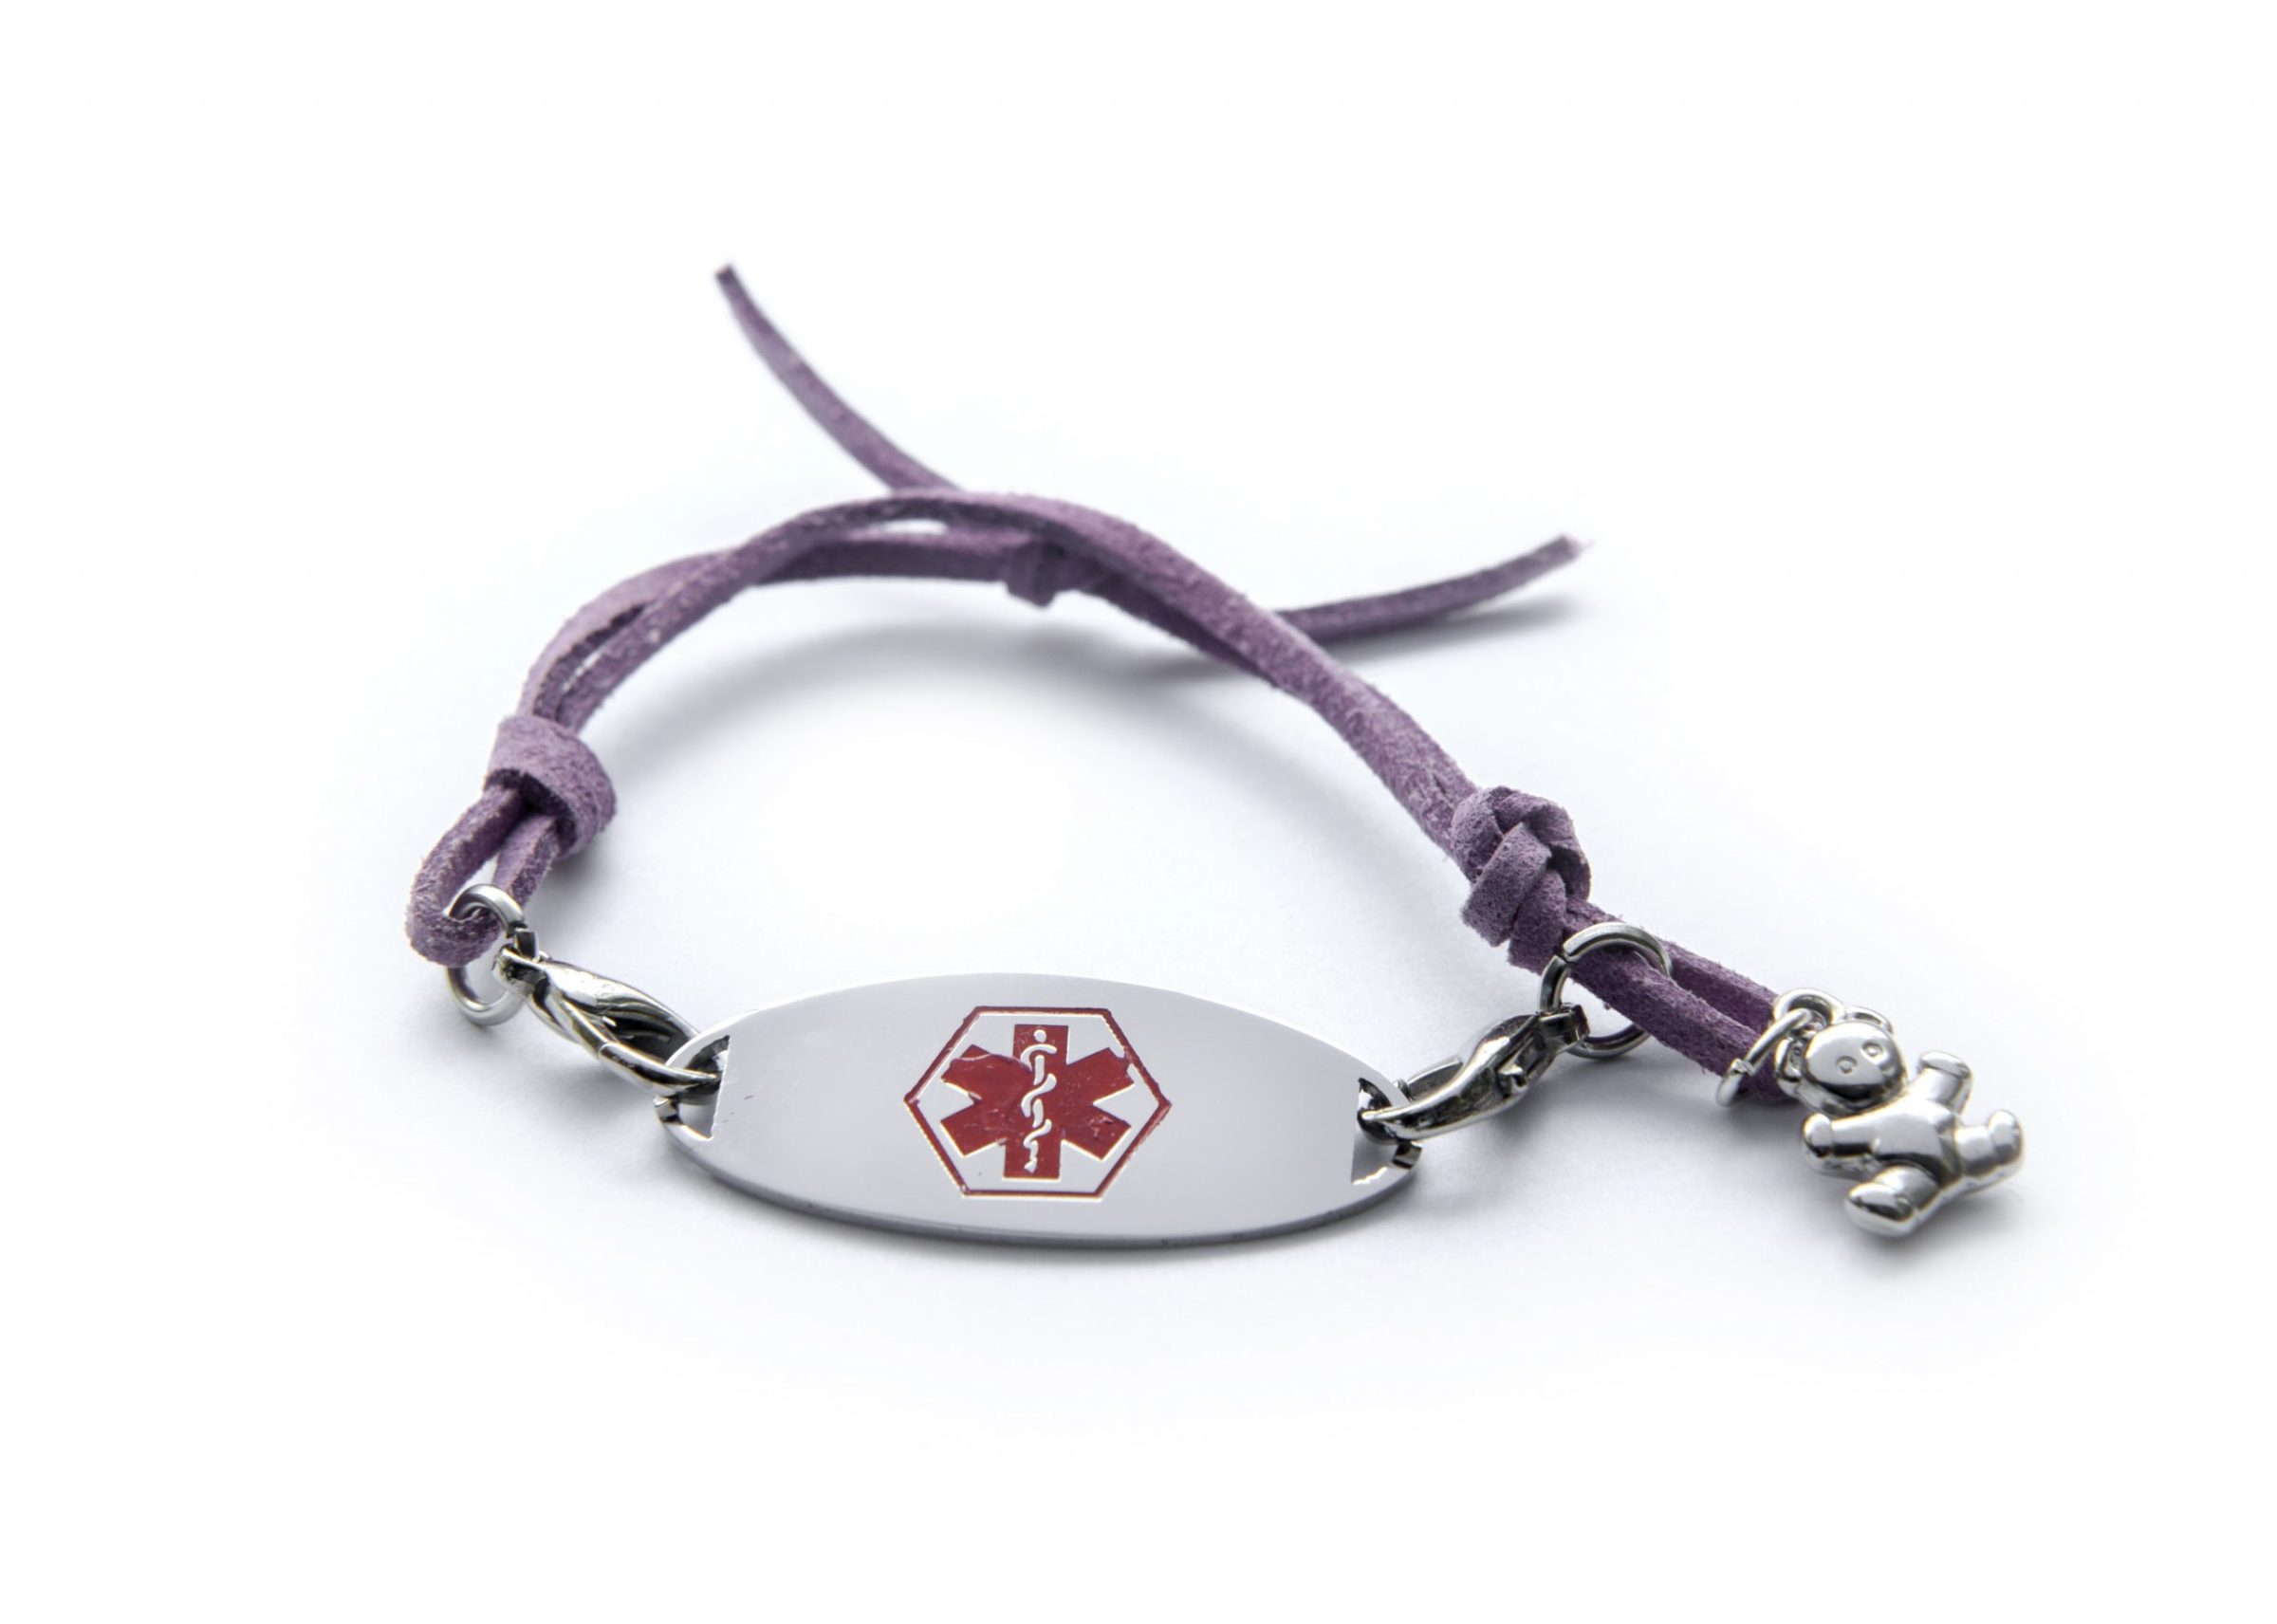 What You Ought to Know About Your Medical Alert Bracelet